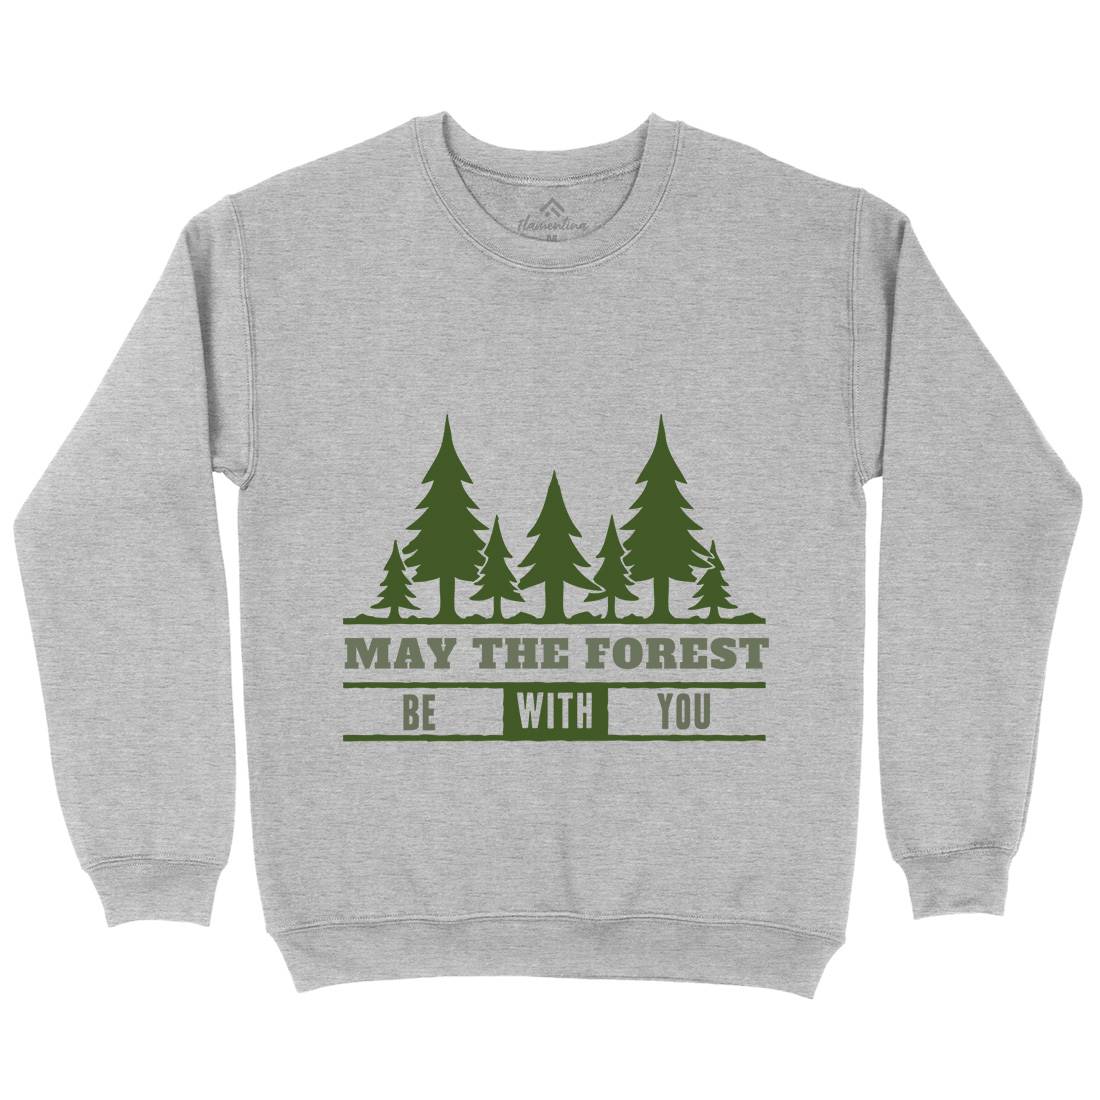 May The Forest Be With You Kids Crew Neck Sweatshirt Nature A345